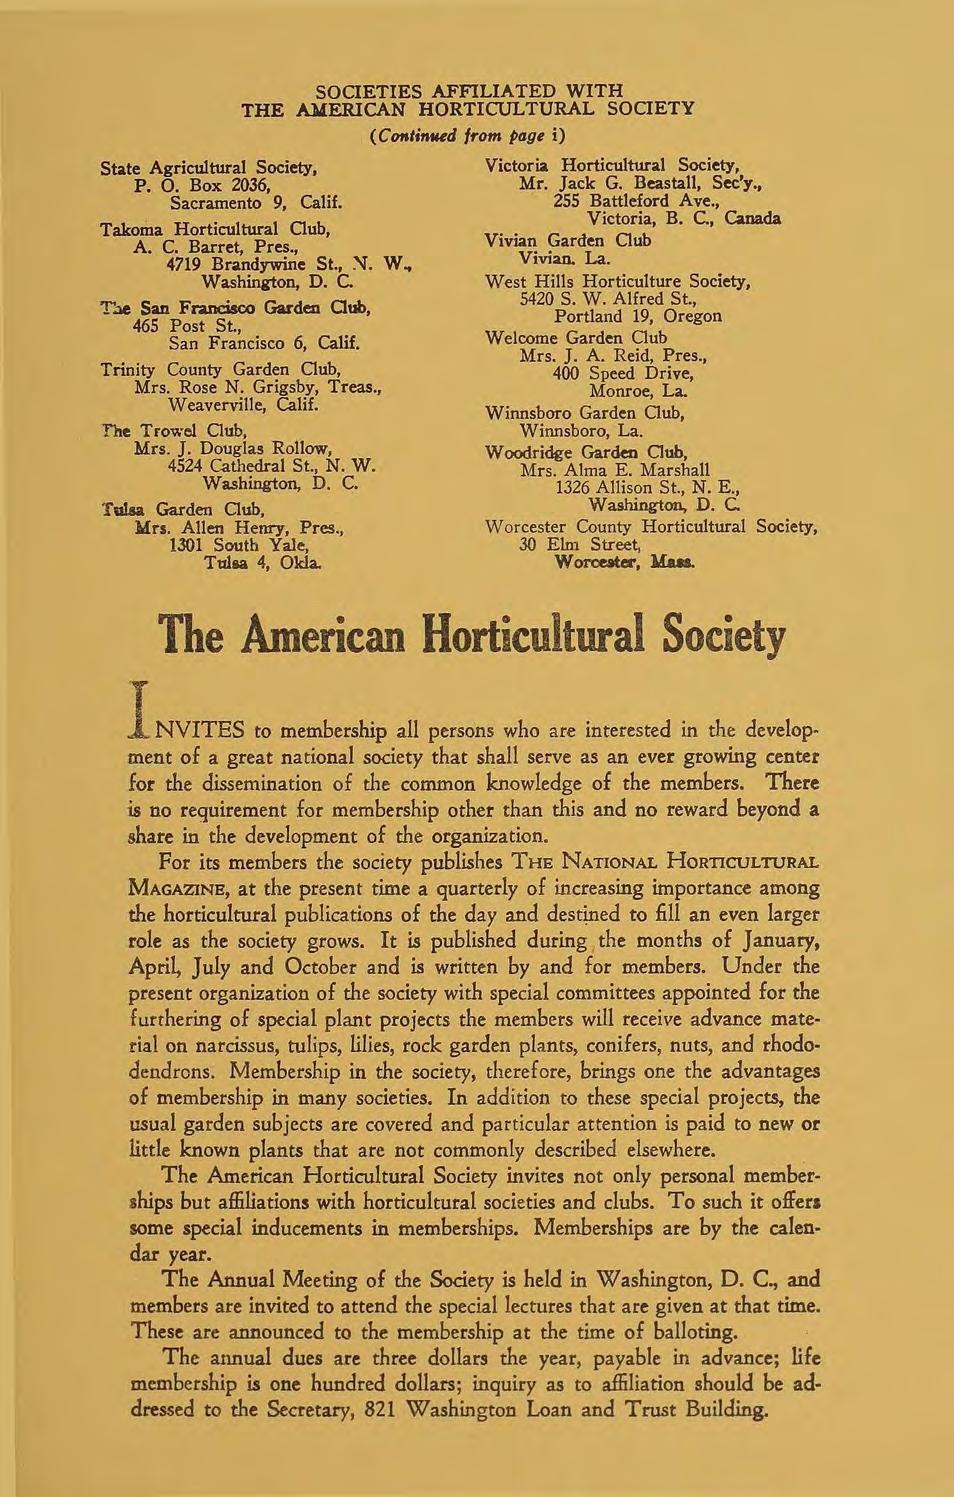 SOCIETIES AFFILIATED WITH THE Al4ERICAN HORTlCUL TURAL SOCIETY (Ctmlinued f,.om page i) State Agricultural Society, P. O. Box 2036, Sacramento 9, Calif. Takoma Horticultural Oub, A. C. Barret, Pres.